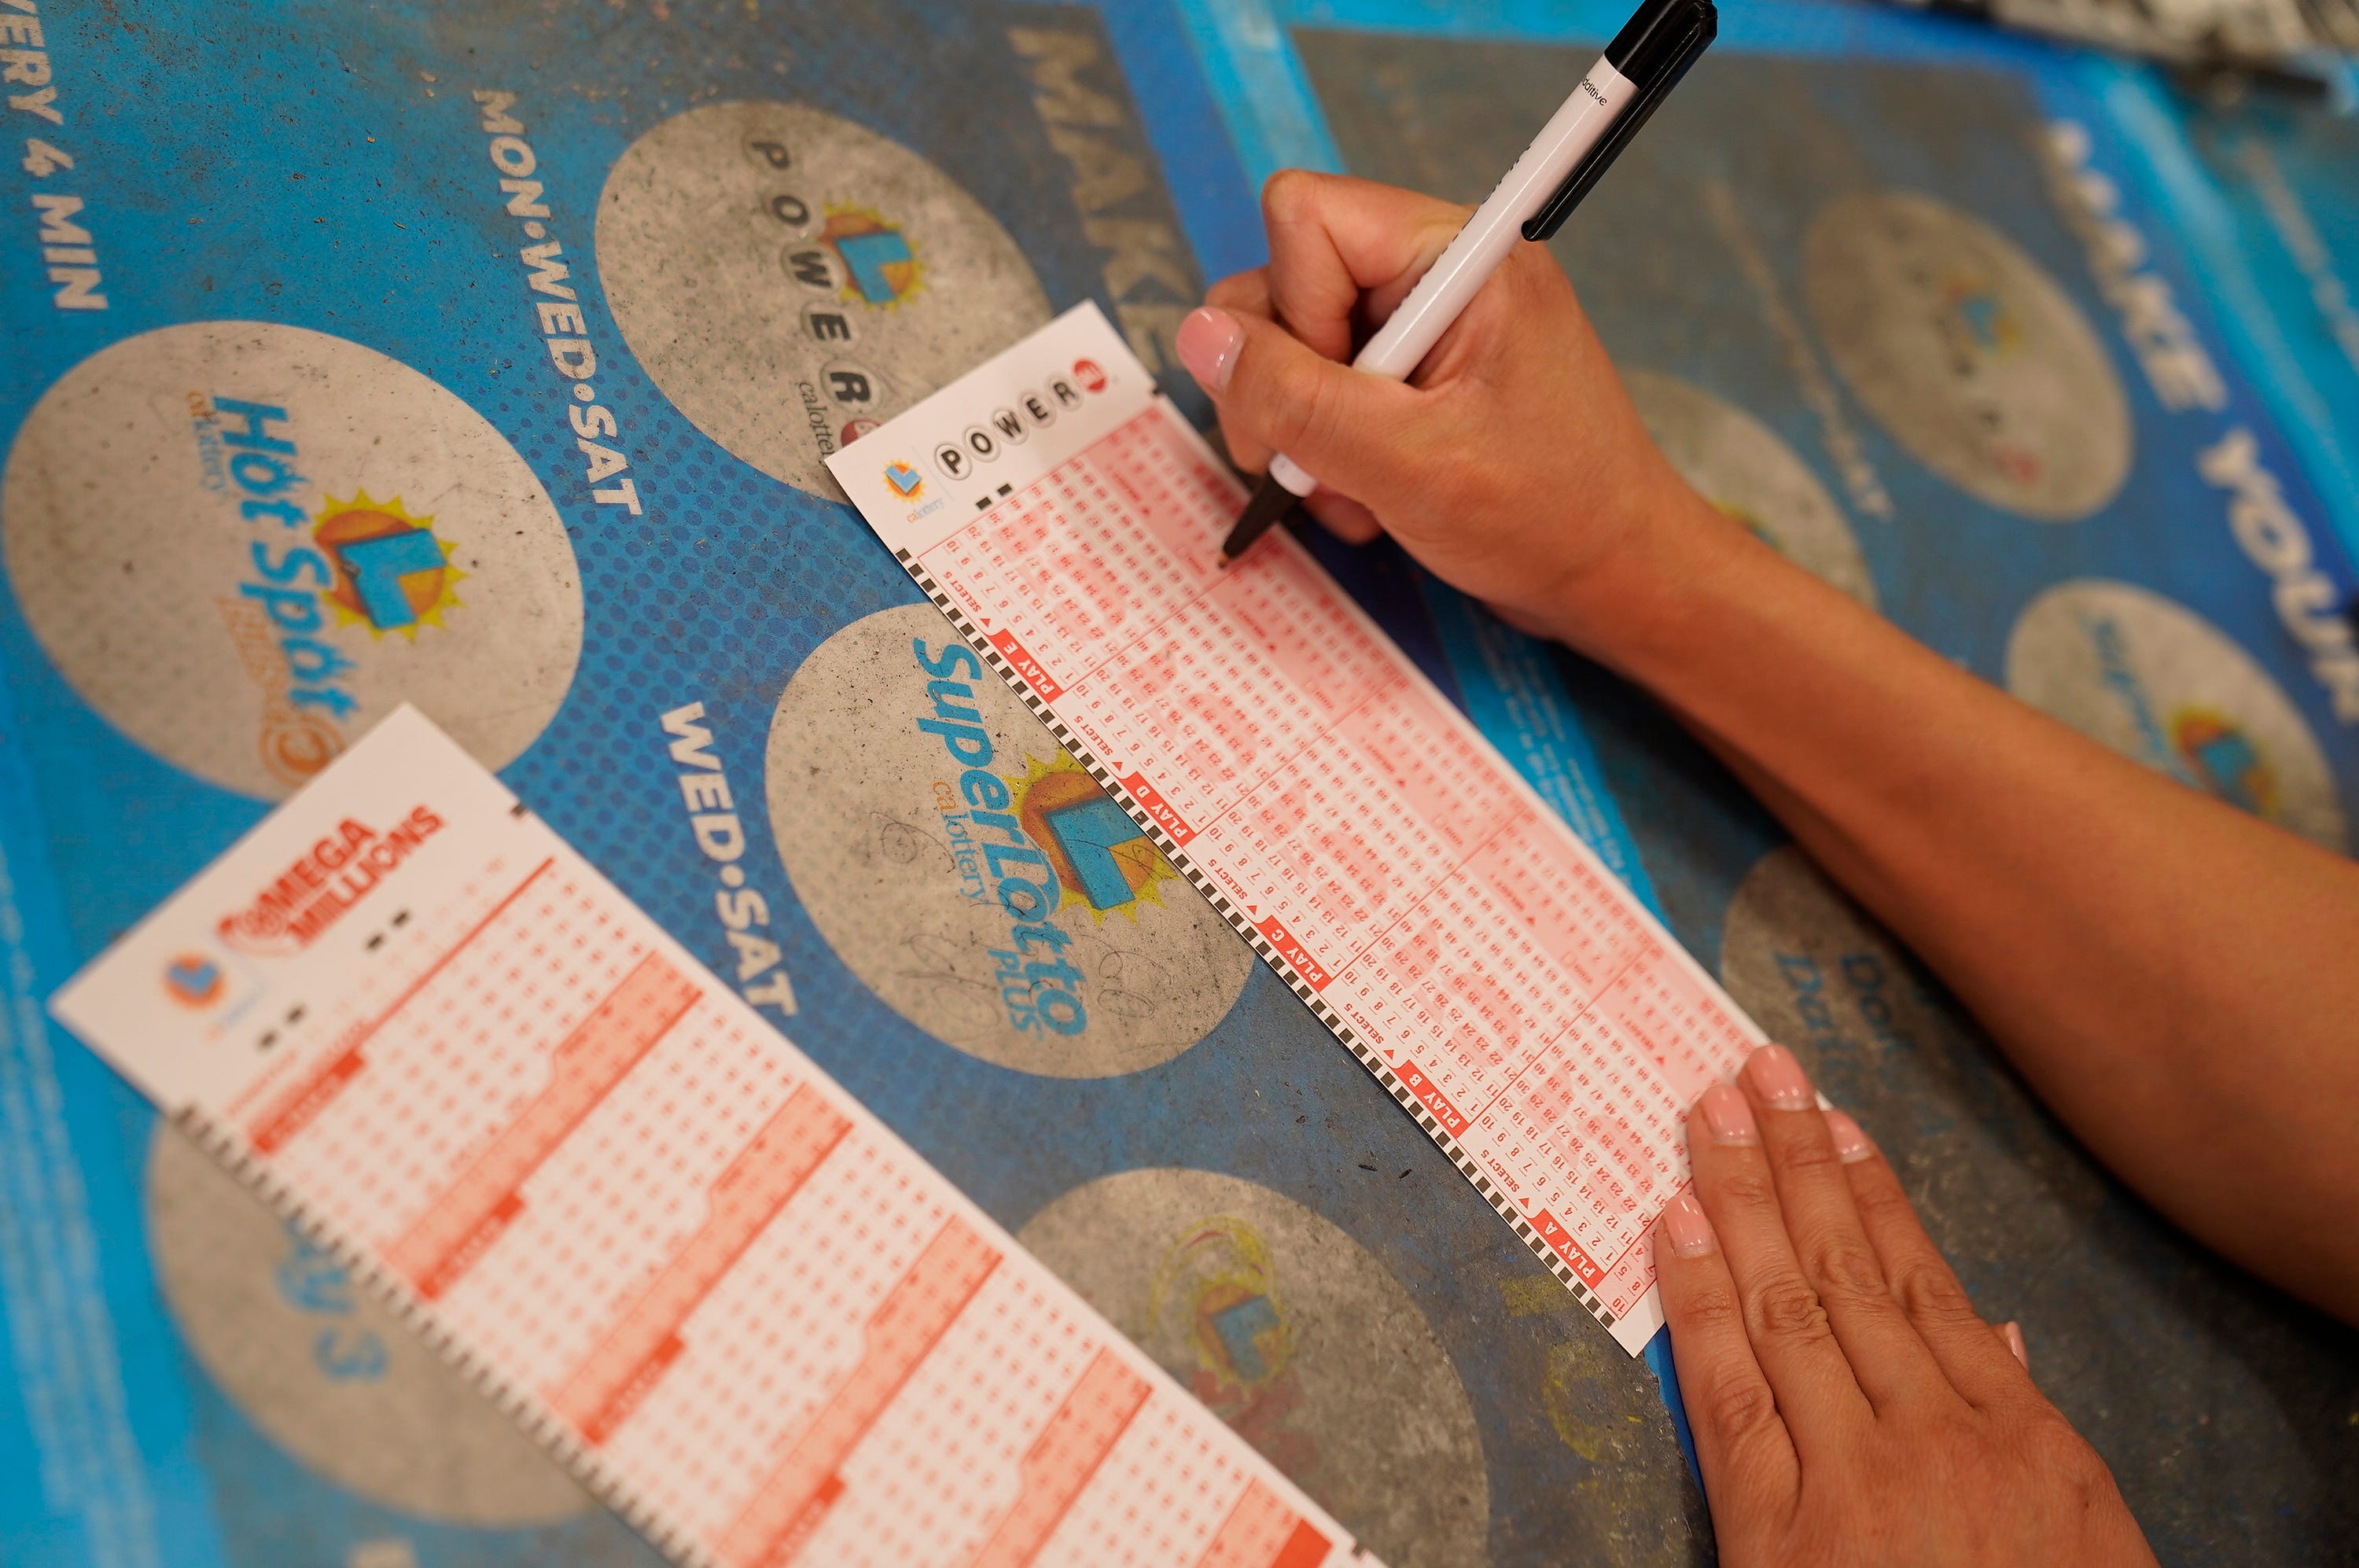 Powerball jackpot climbs to $345M. When is the next drawing?